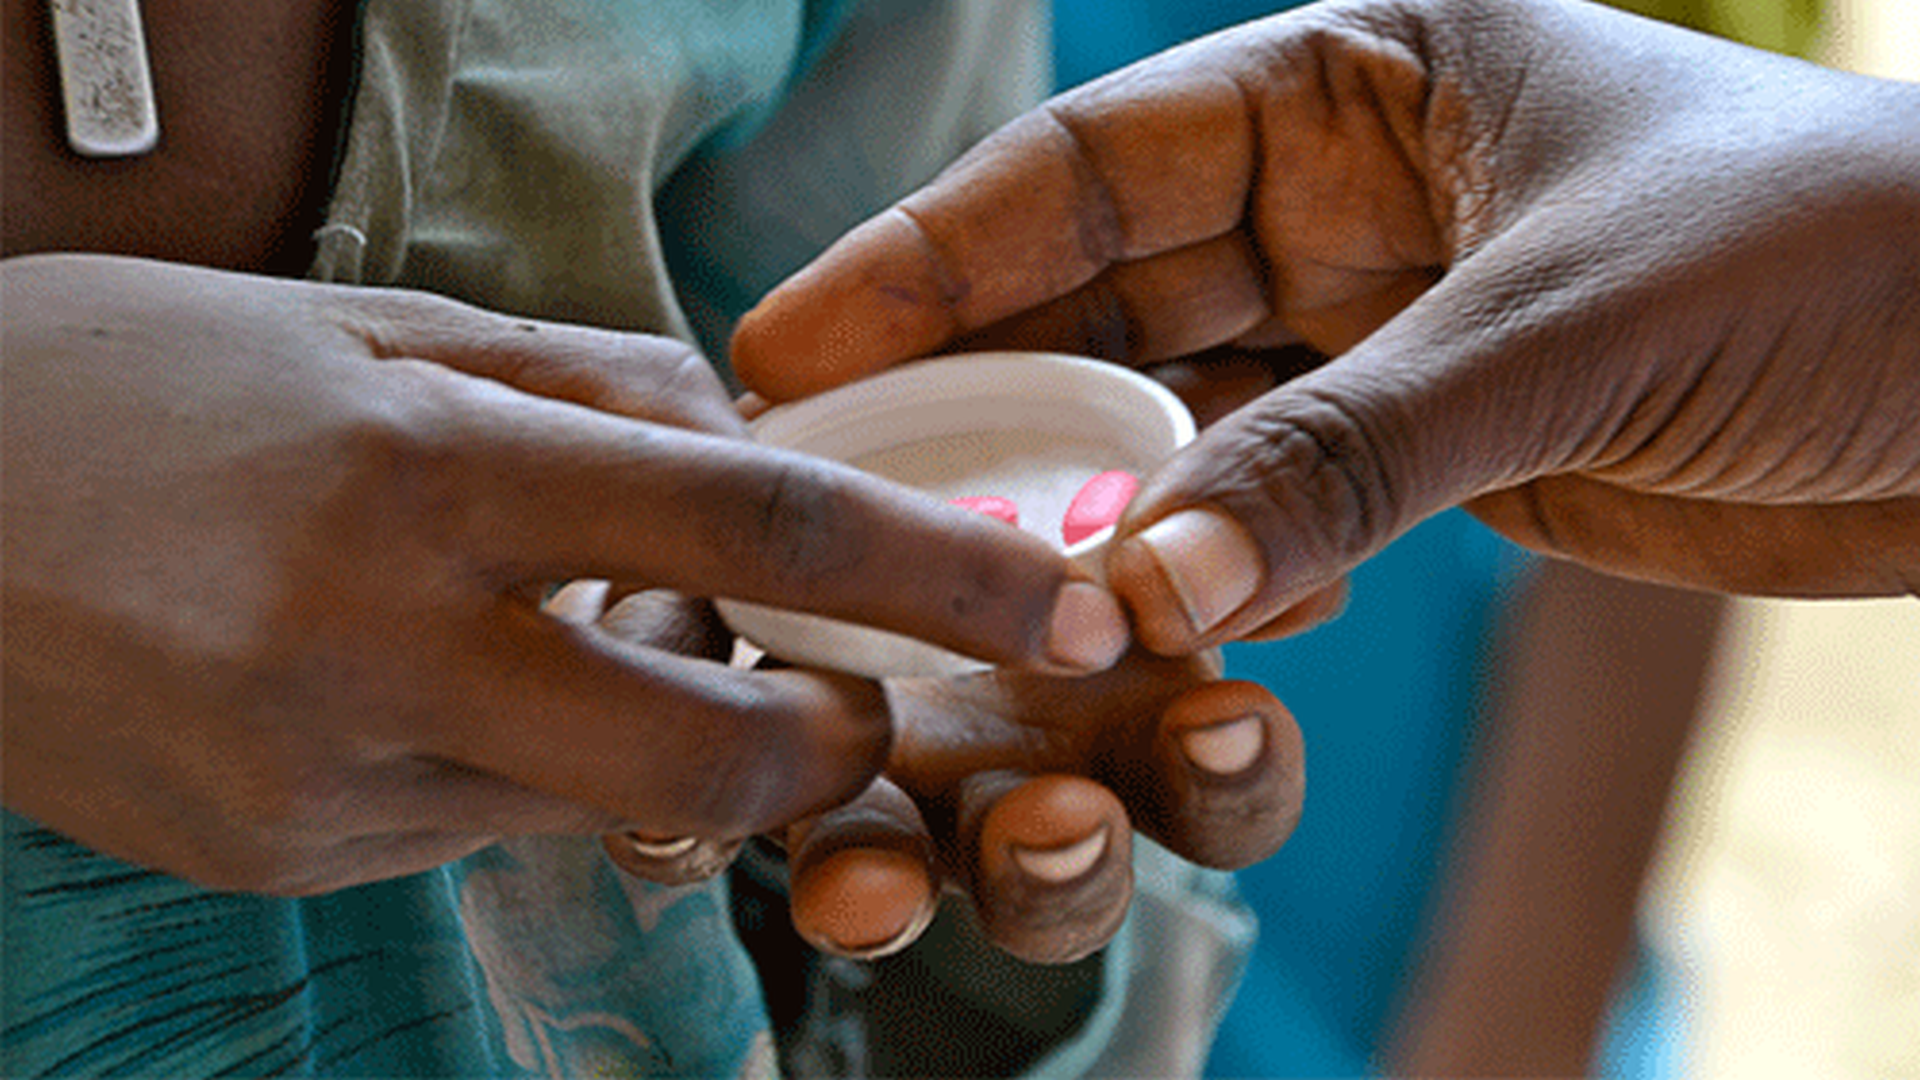 85 Million People Treated for Trachoma Through Expanded Access to Medicine